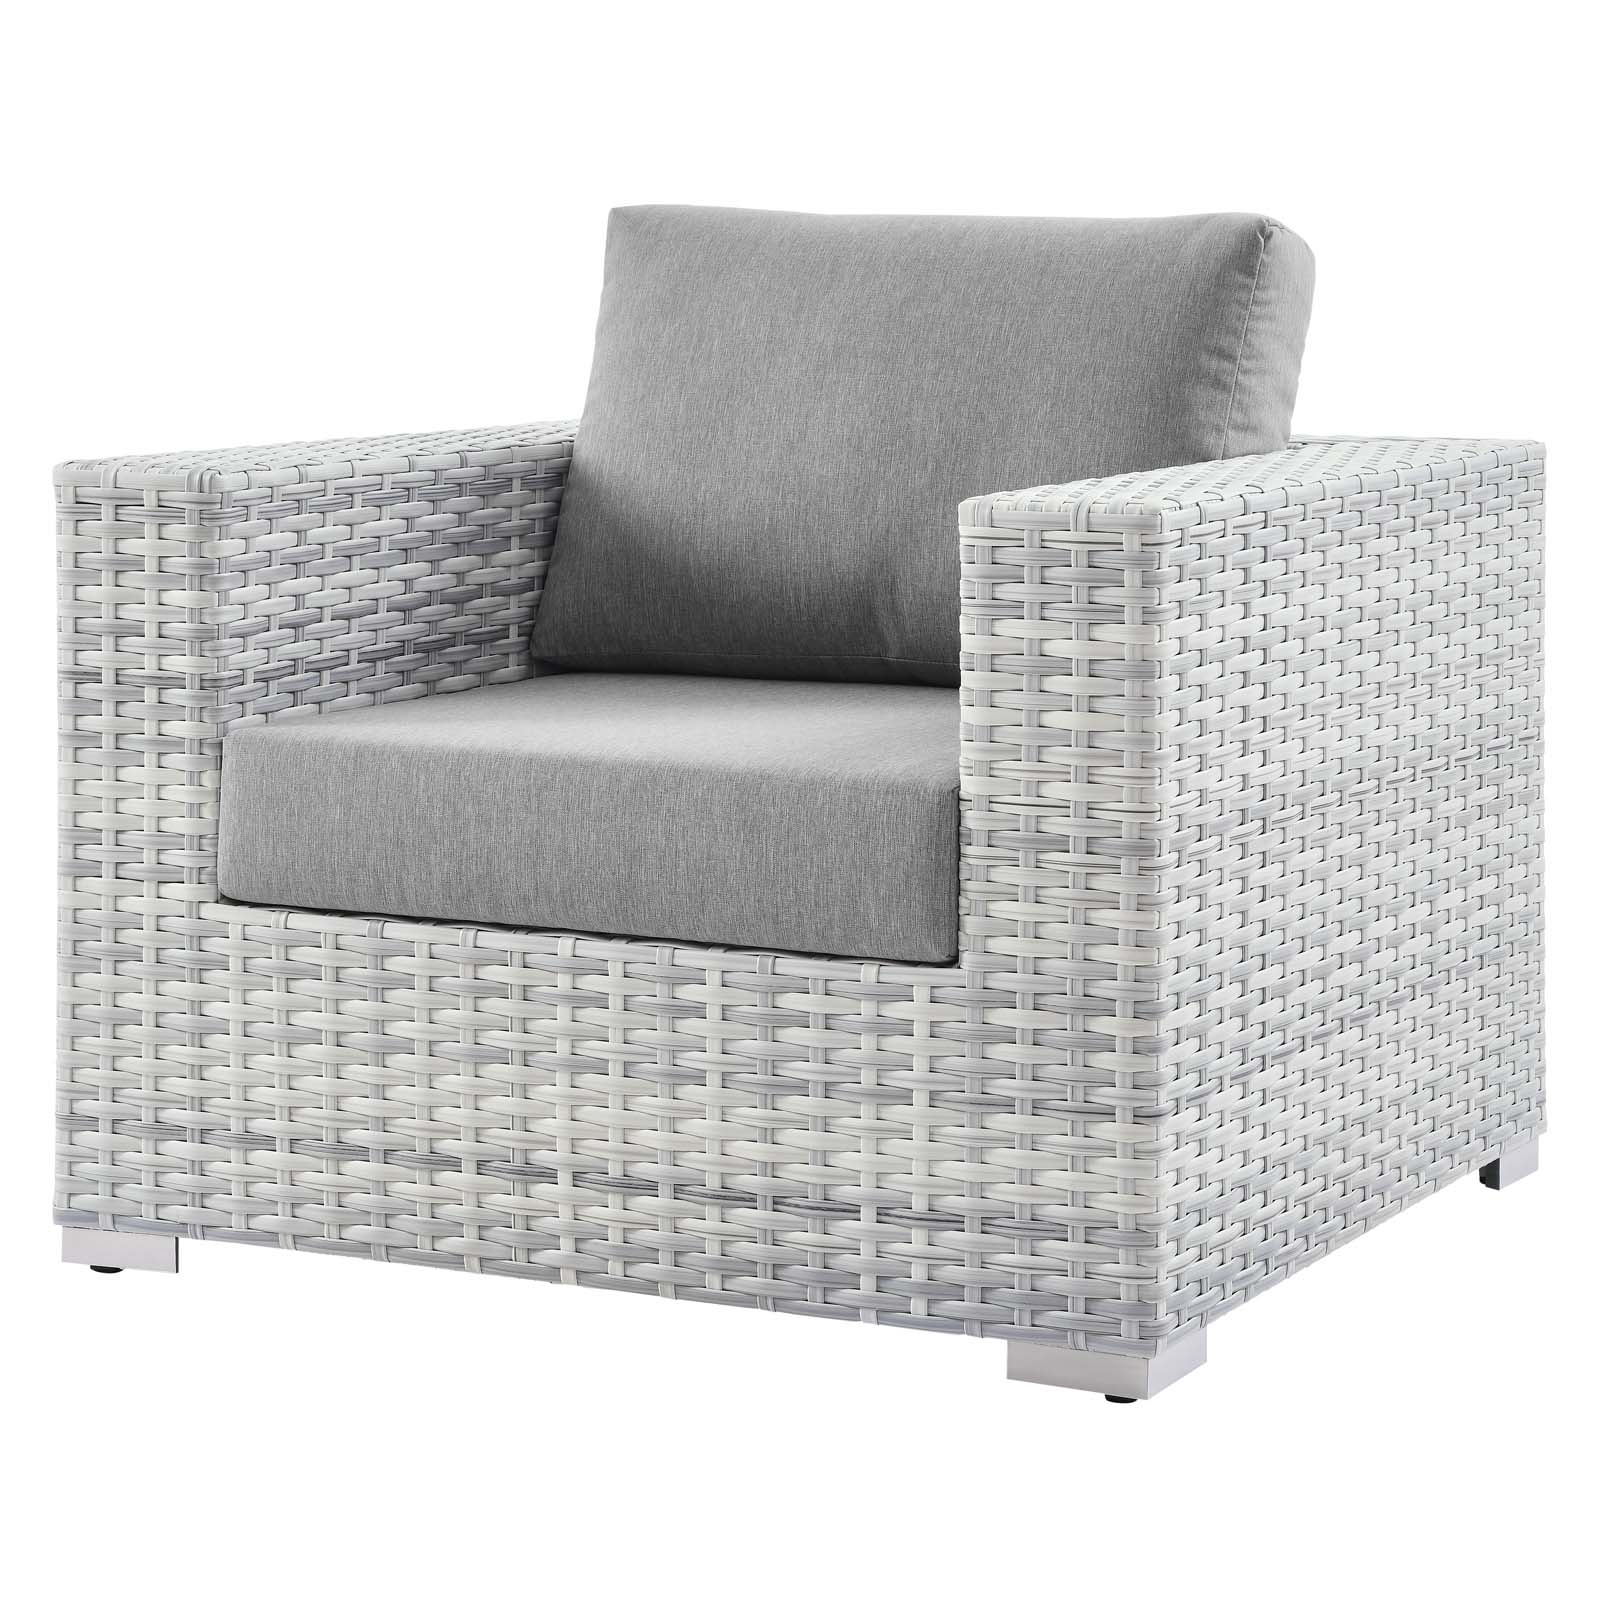 Lounge Sectional Sofa Chair Set, Rattan, Wicker, Grey Gray, Modern Contemporary Urban Design, Outdoor Patio Balcony Cafe Bistro Garden Furniture Hotel Hospitality - image 4 of 10